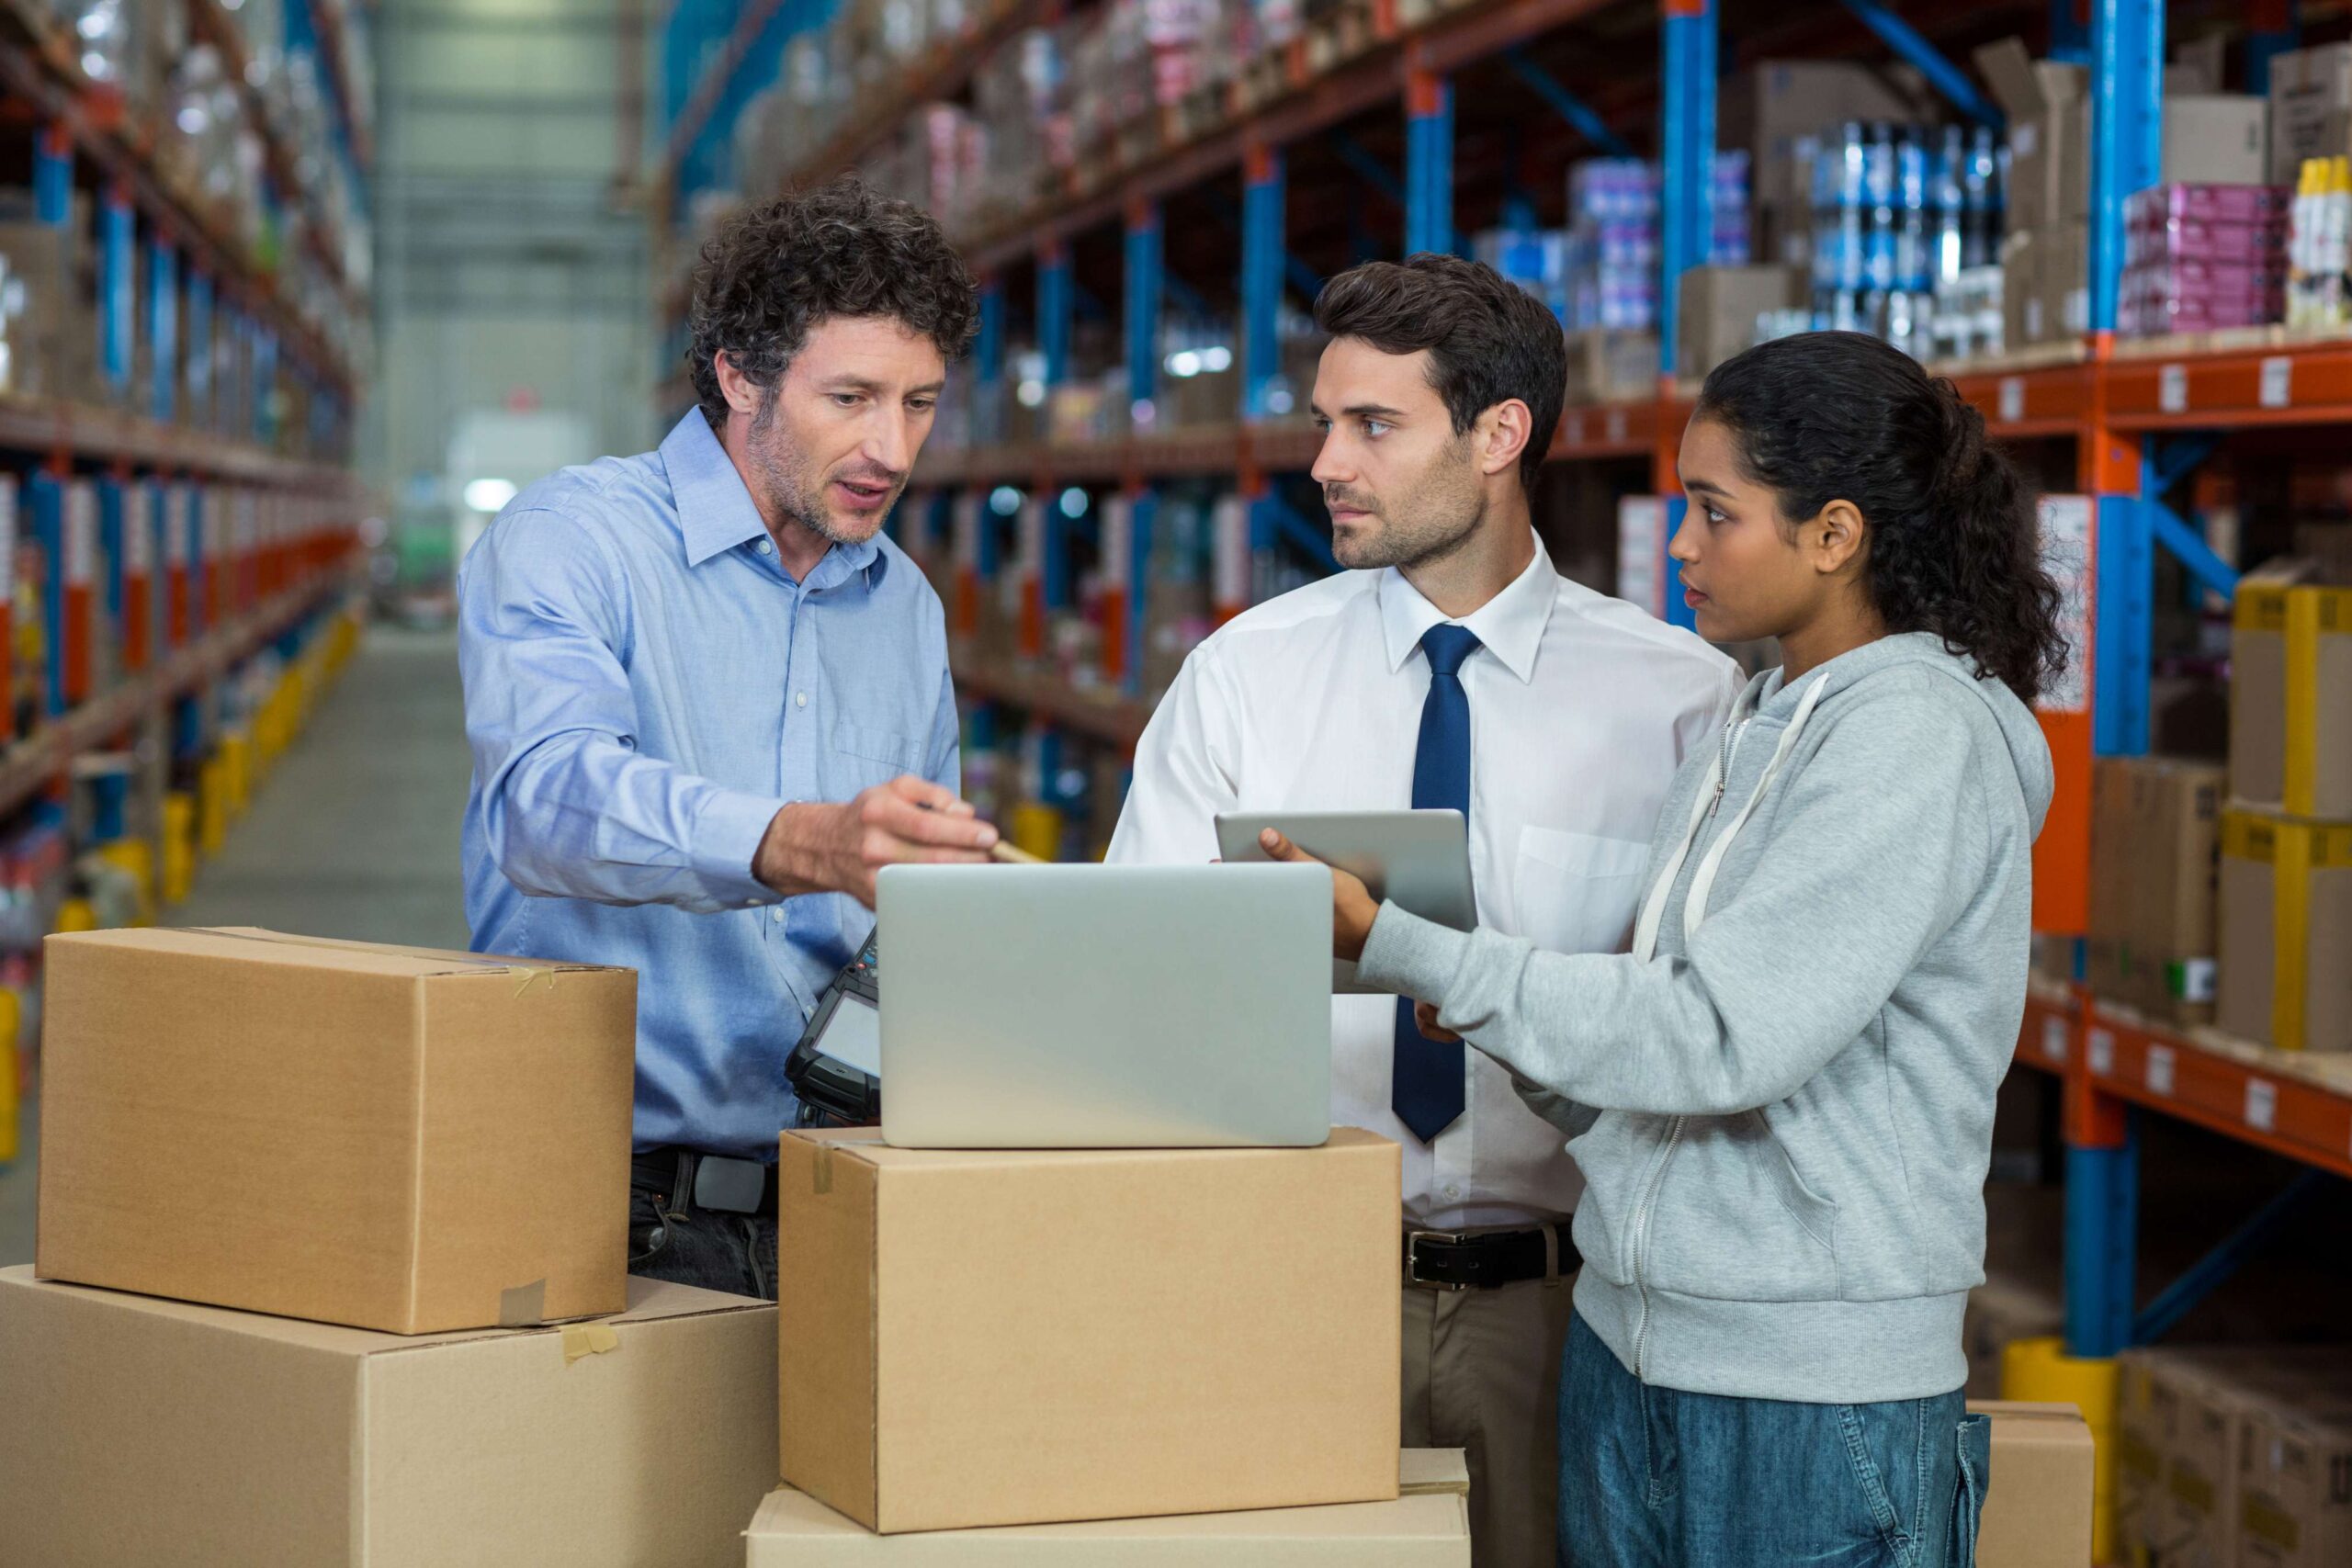 warehouse-manager-worker-discussing-with-laptop (Representational Image)